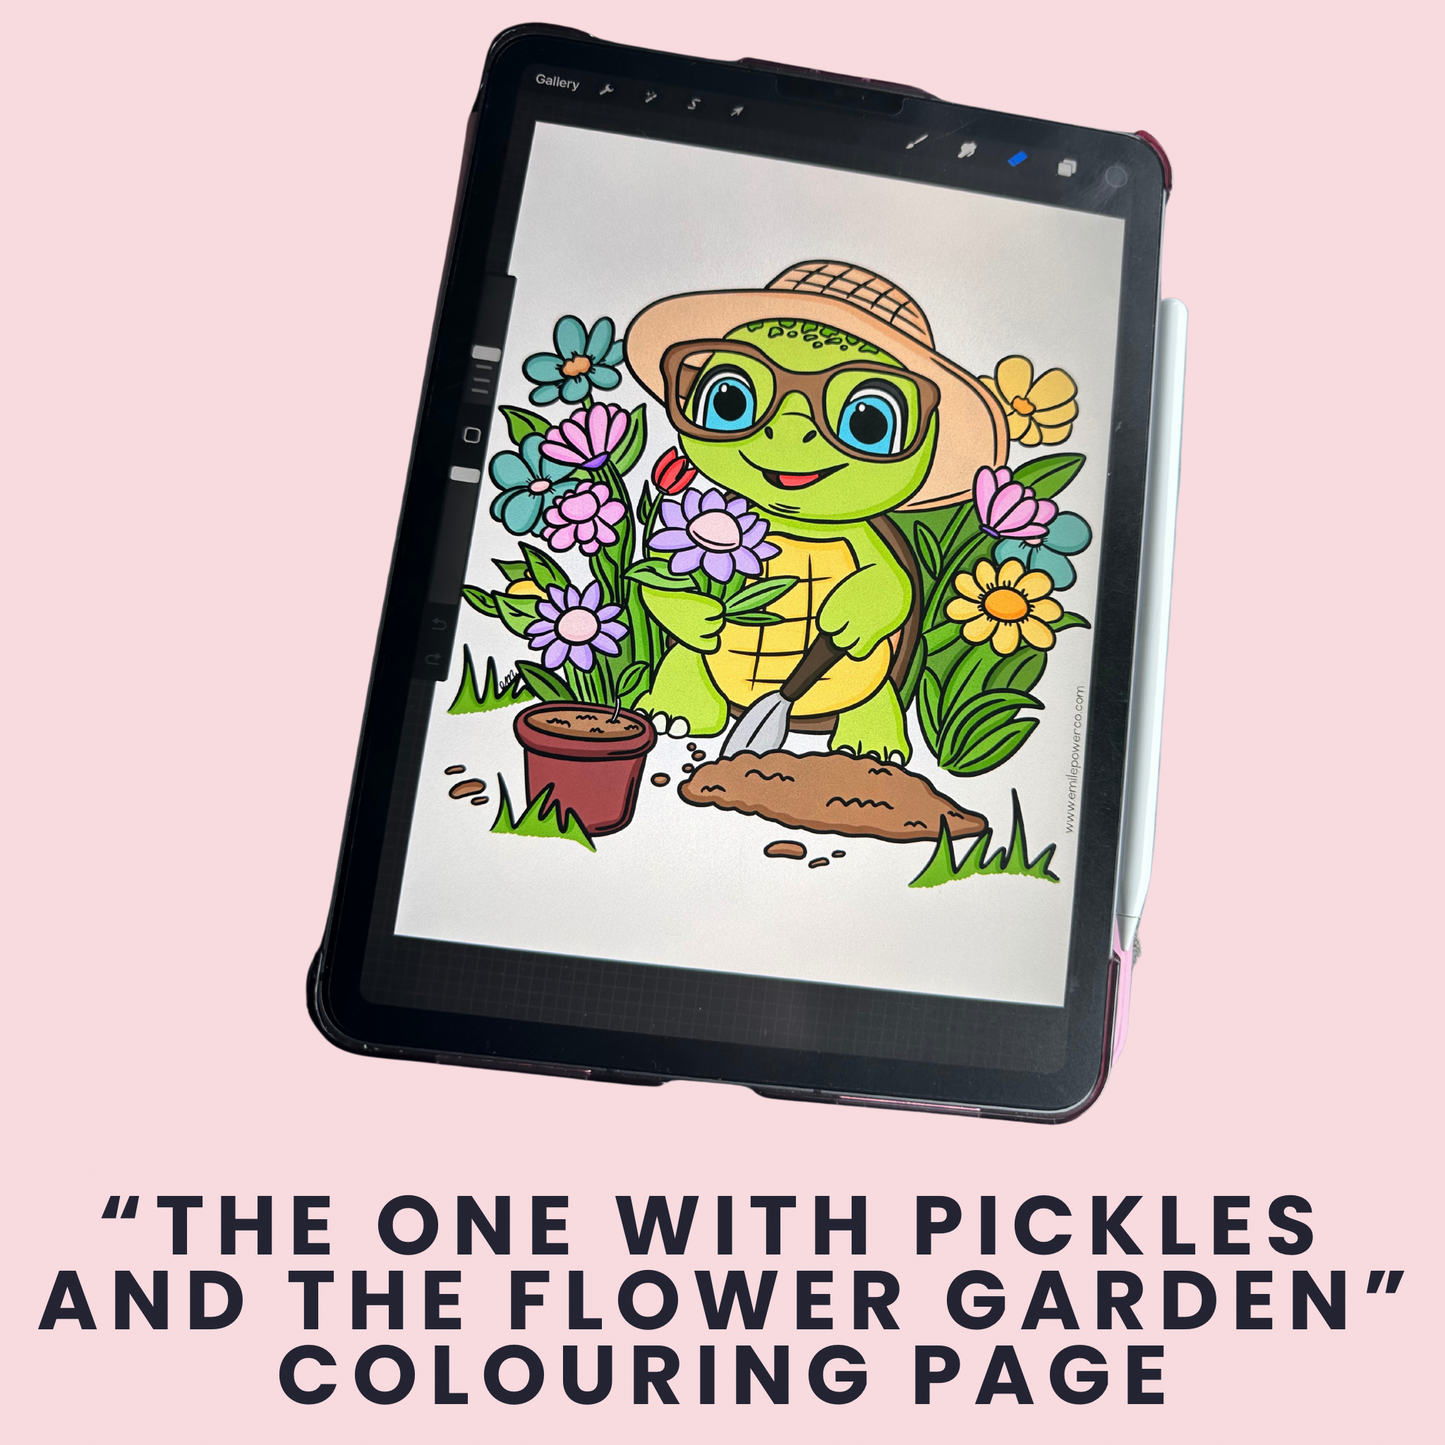 “The One With Pickles and the Flower Garden” Colouring Page